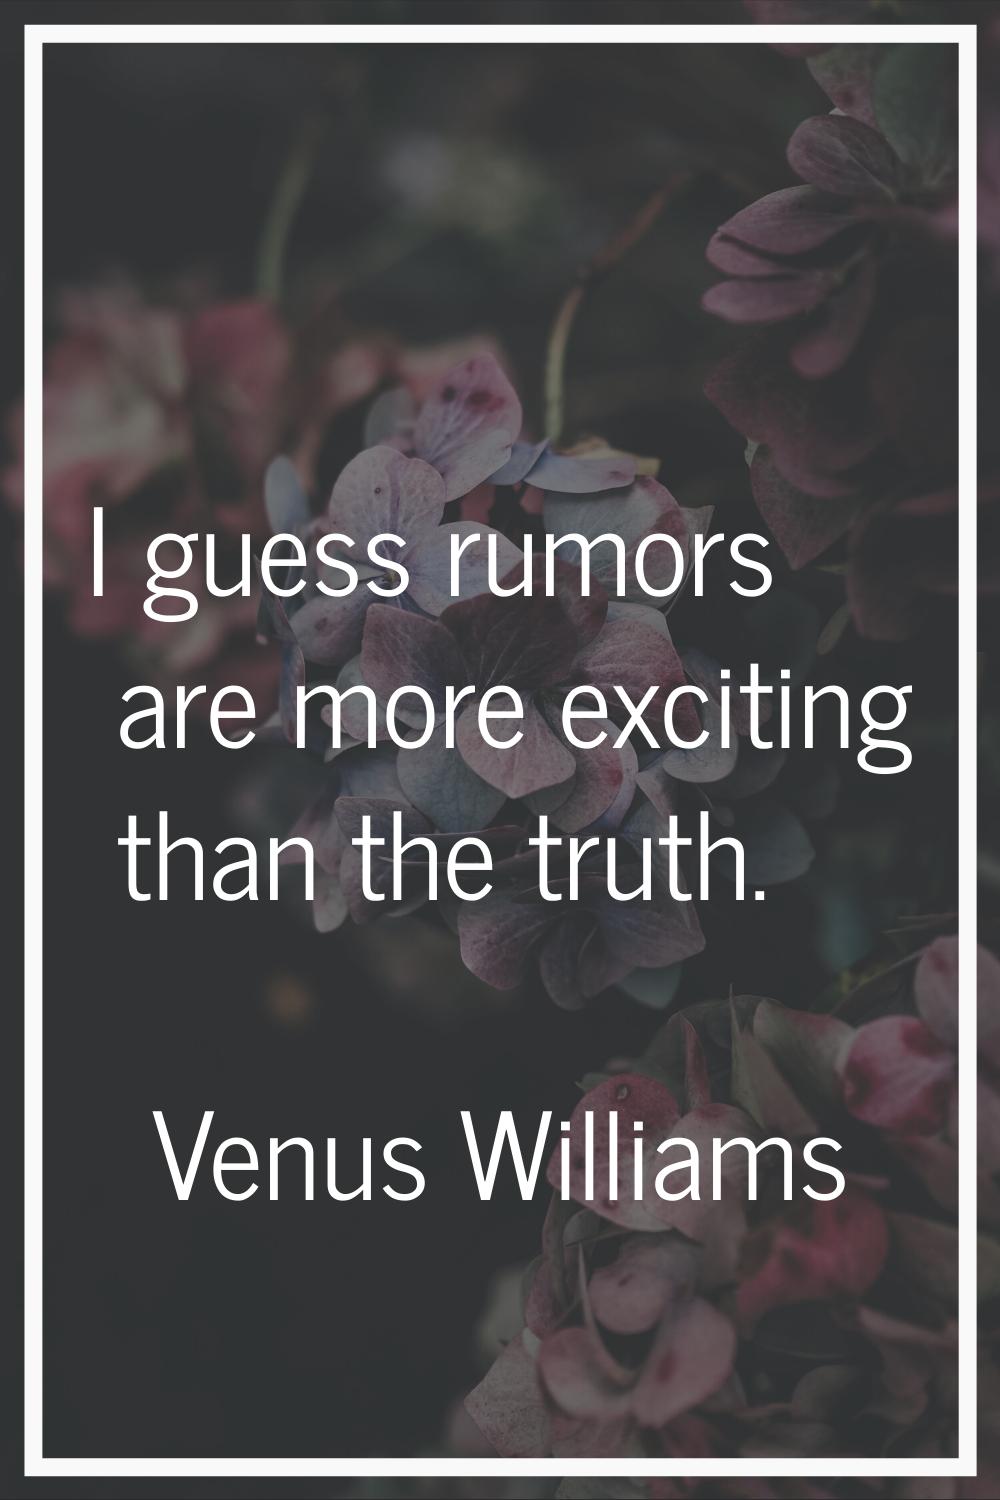 I guess rumors are more exciting than the truth.